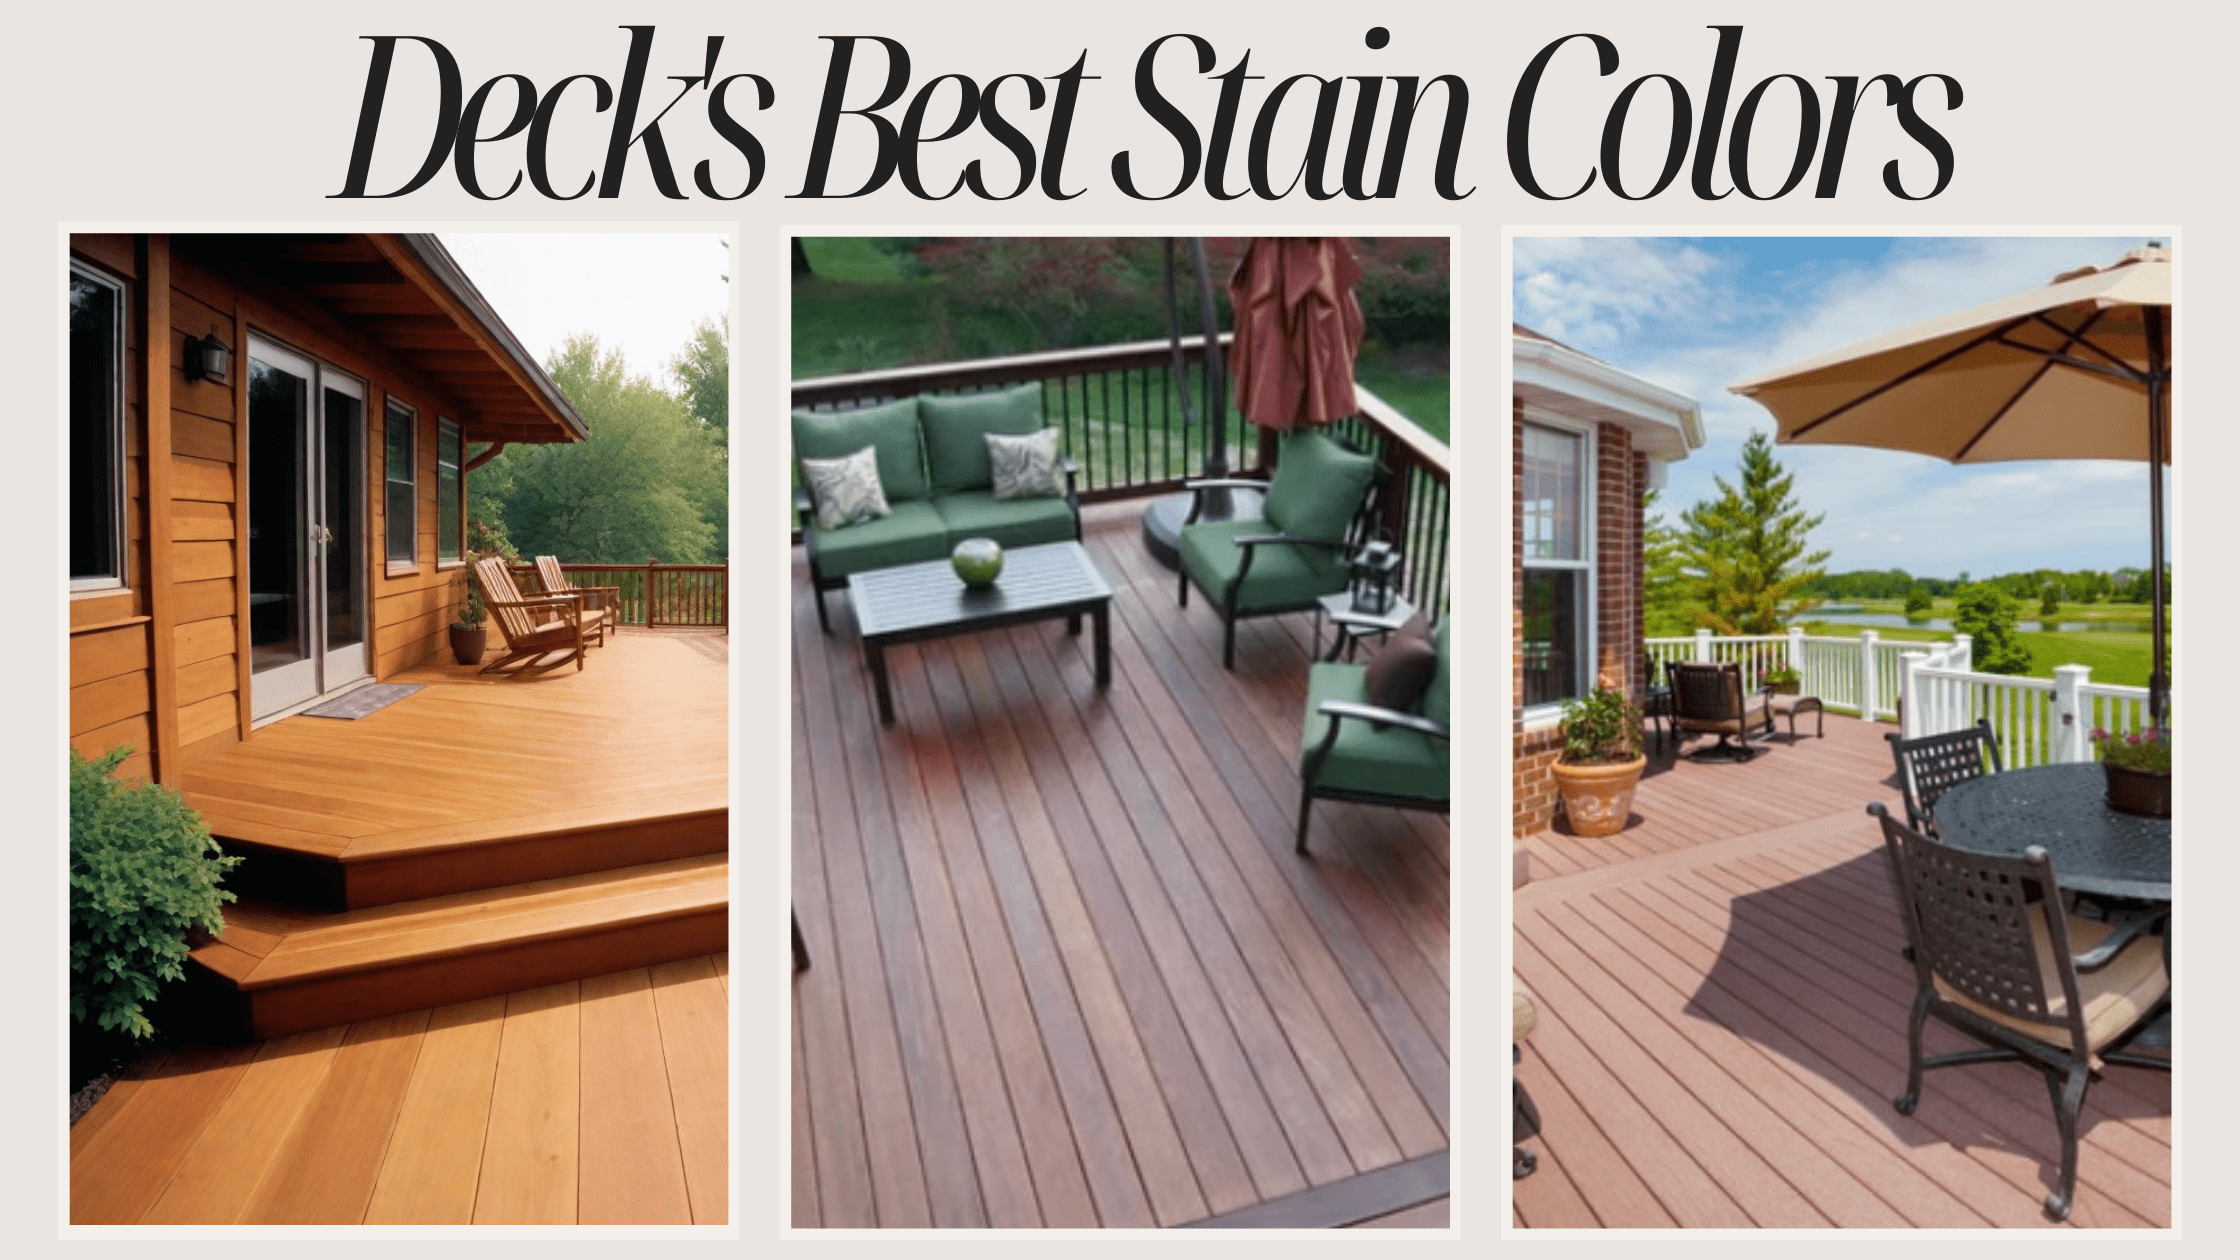 Top 8 - Finding Your Deck's Best Stain Color Advice and Ideas